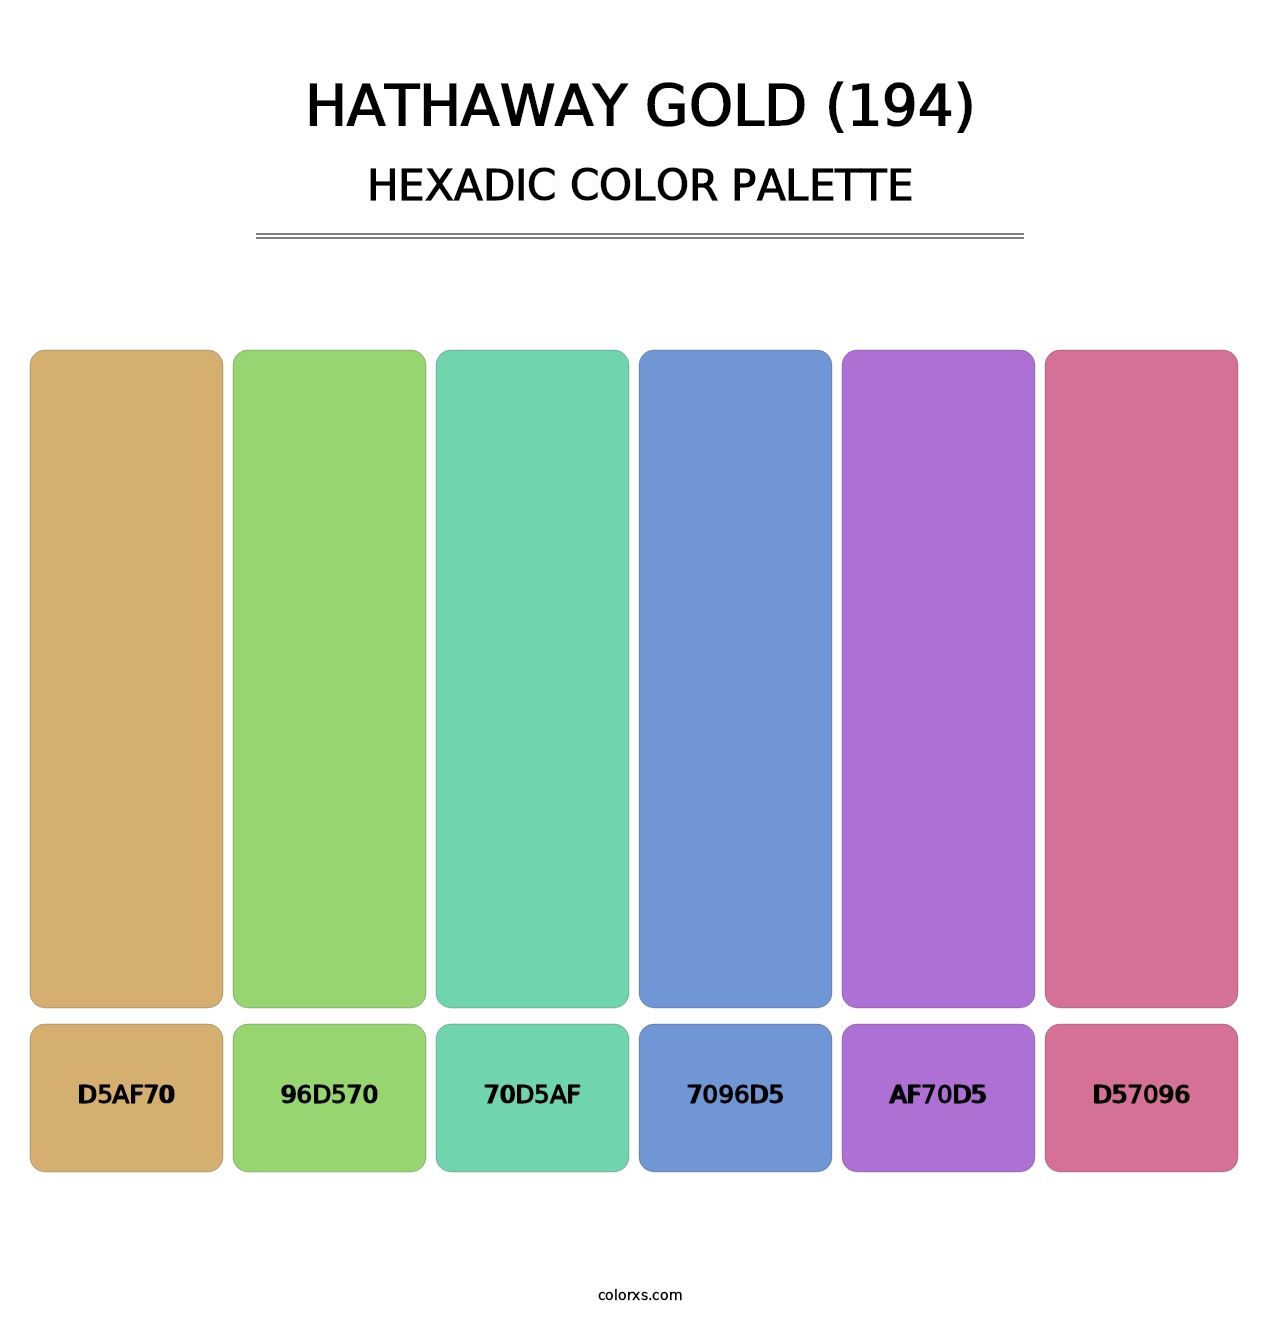 Hathaway Gold (194) - Hexadic Color Palette